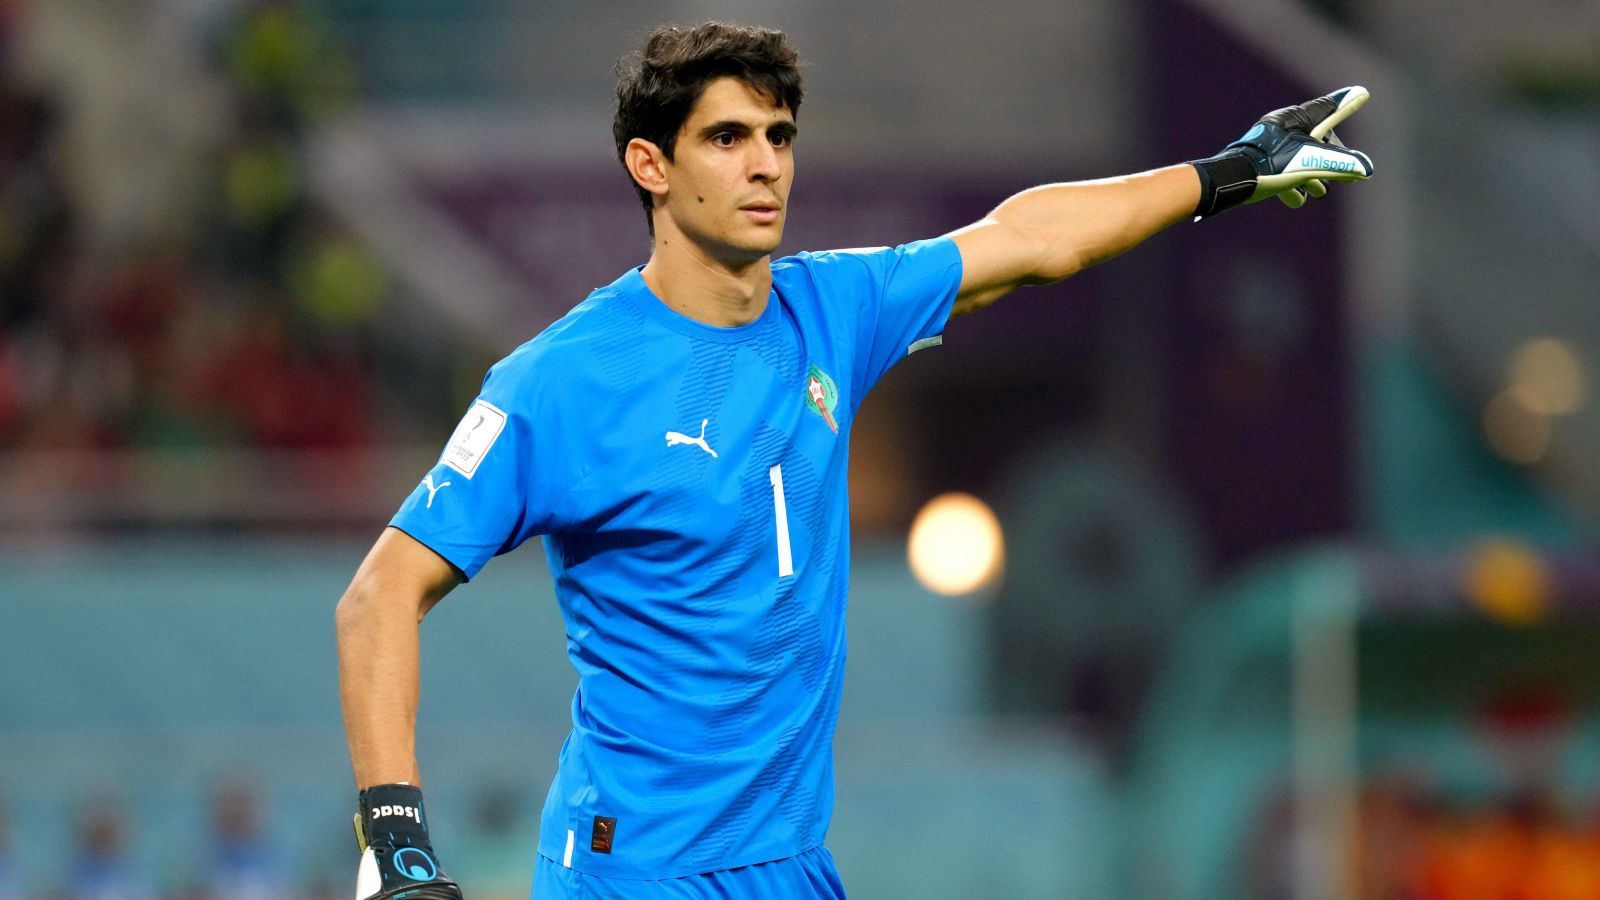 FIFA lists Bounou, Martinez and Courtois for Goalkeeper of the Year award